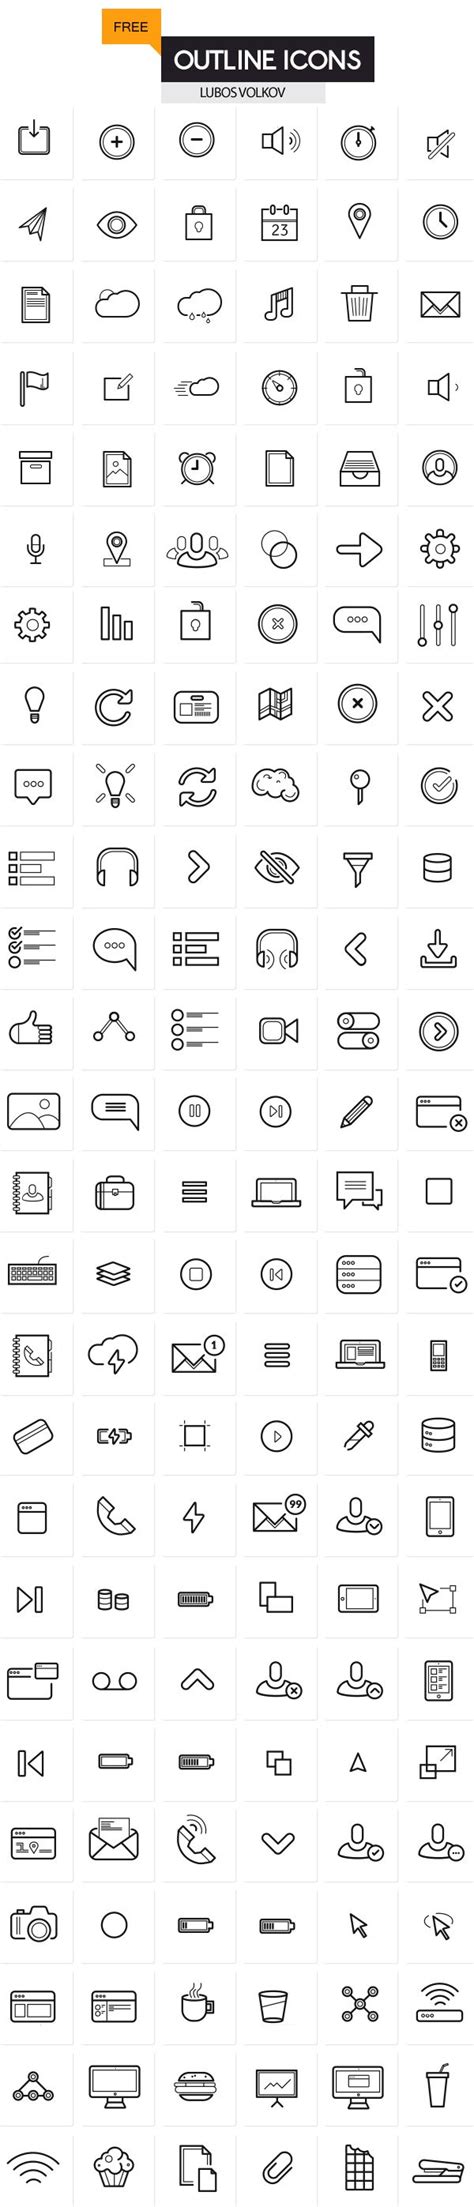 outline vector icons set  designers icons graphic design